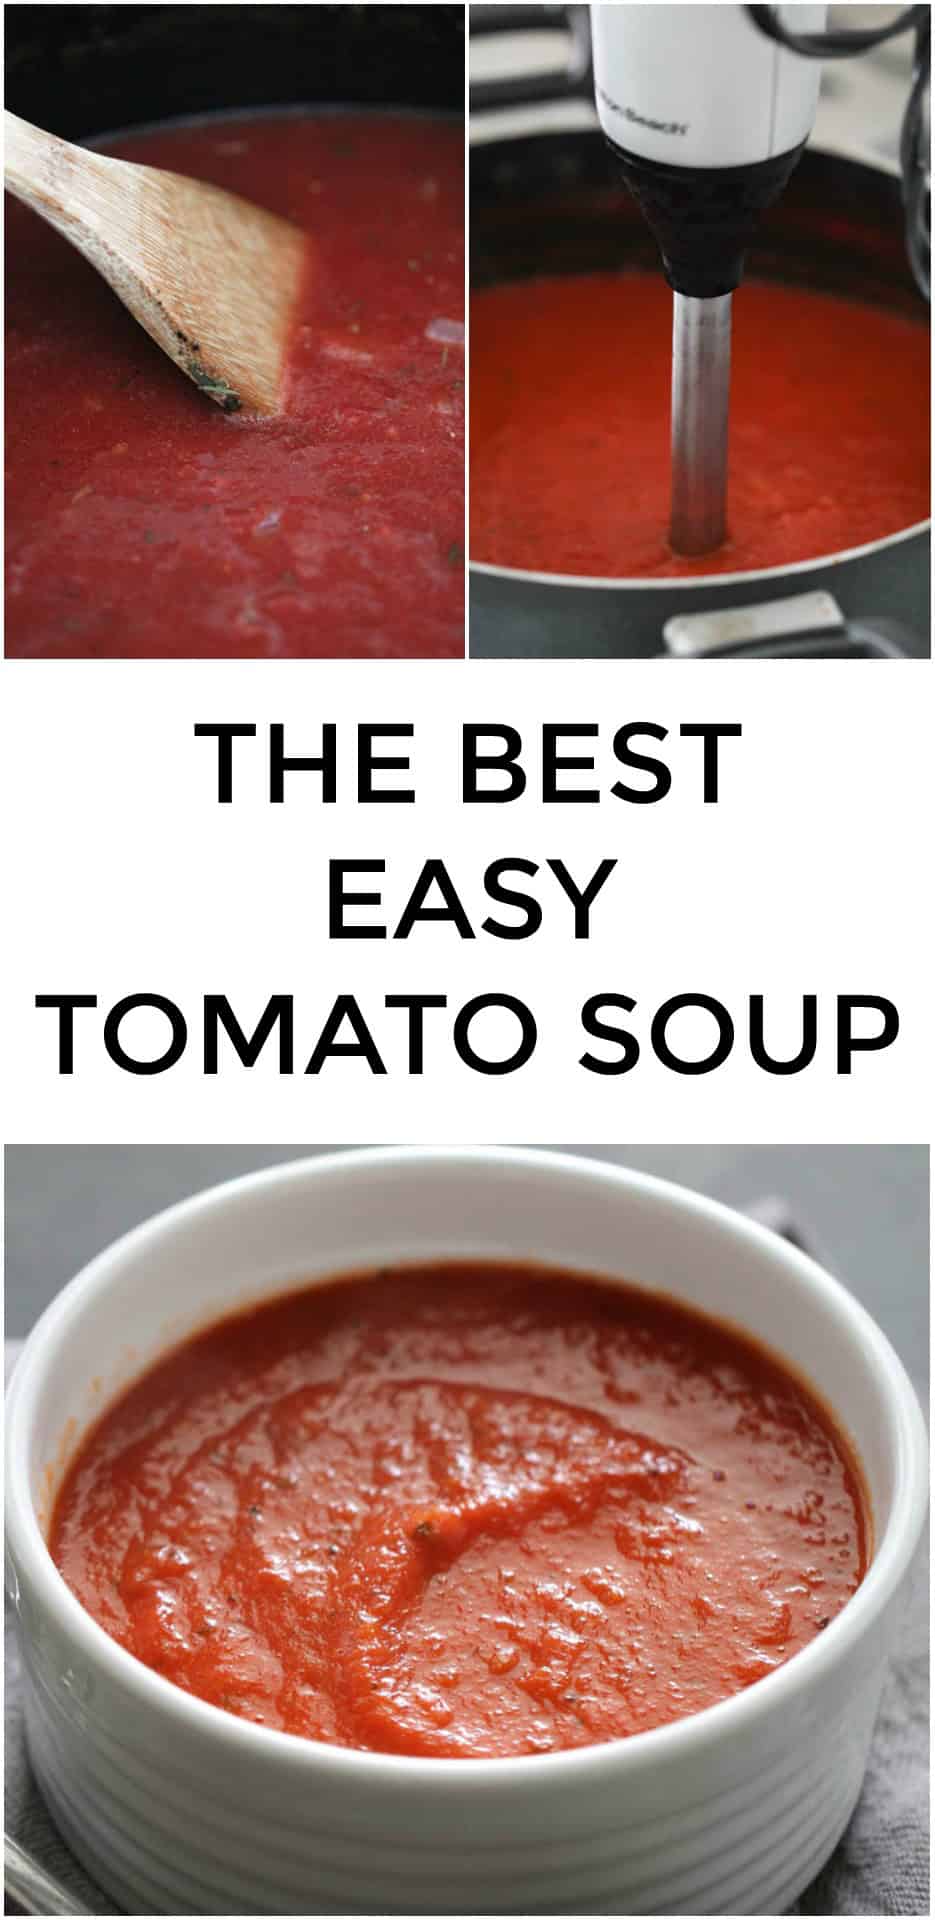 https://www.sixsistersstuff.com/wp-content/uploads/2019/09/The-Best-Homemade-Tomato-Soup-from-SixSistersStuff.com_.-This-easy-soup-can-be-made-on-the-stovetop-with-canned-tomatoes-and-is-so-delicious-dinner-soup-stew-comfort-food.jpg